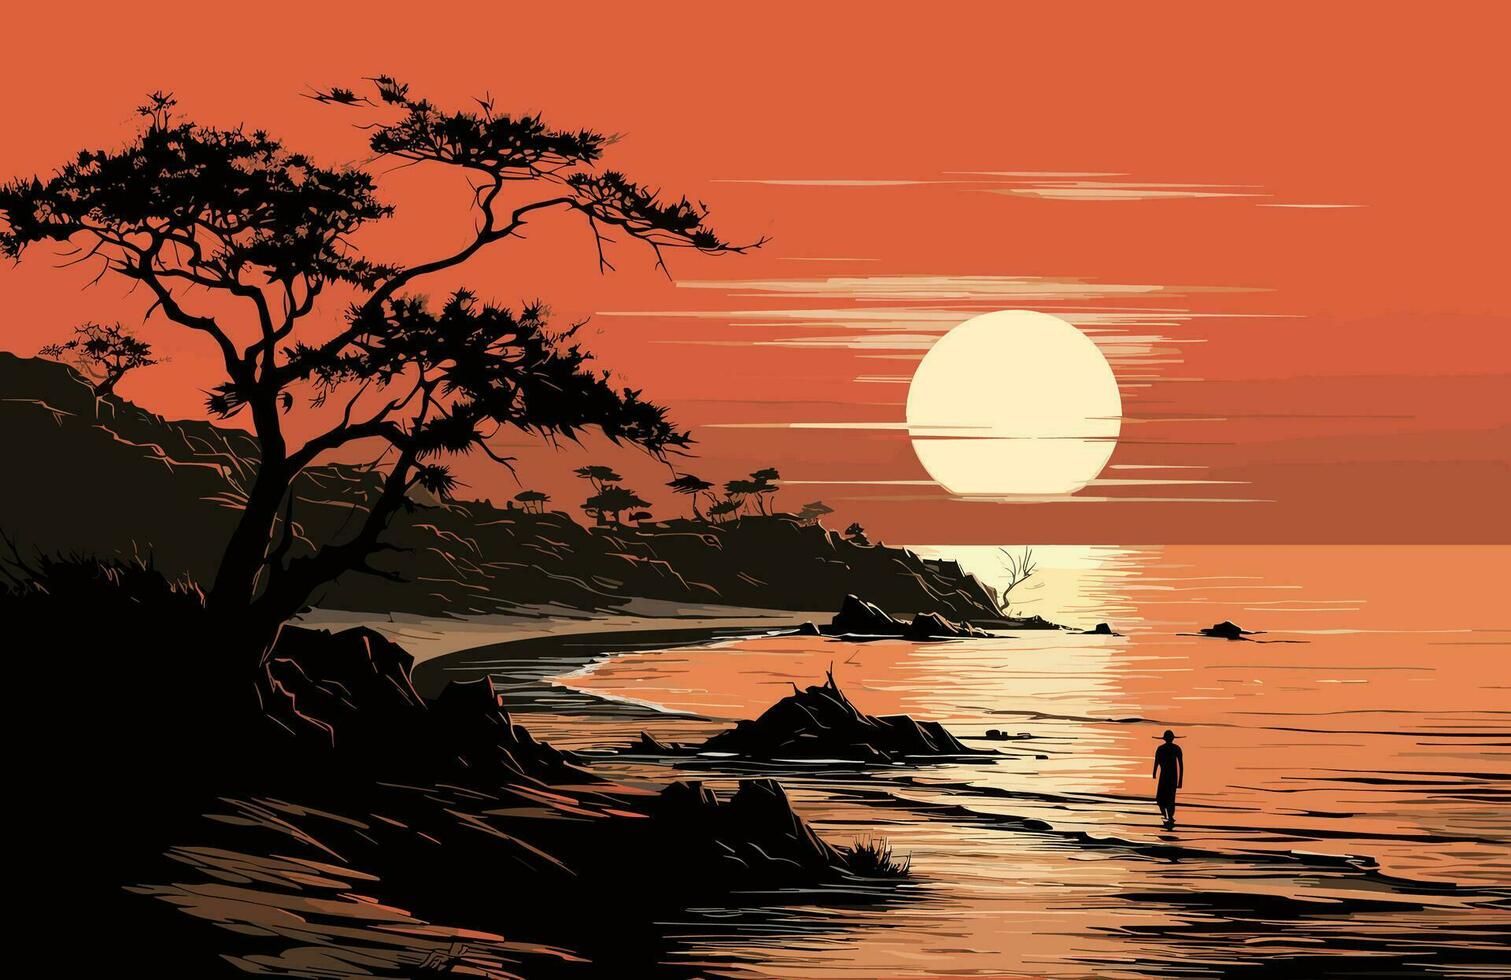 A fisherman walks on the beach at sunset vector